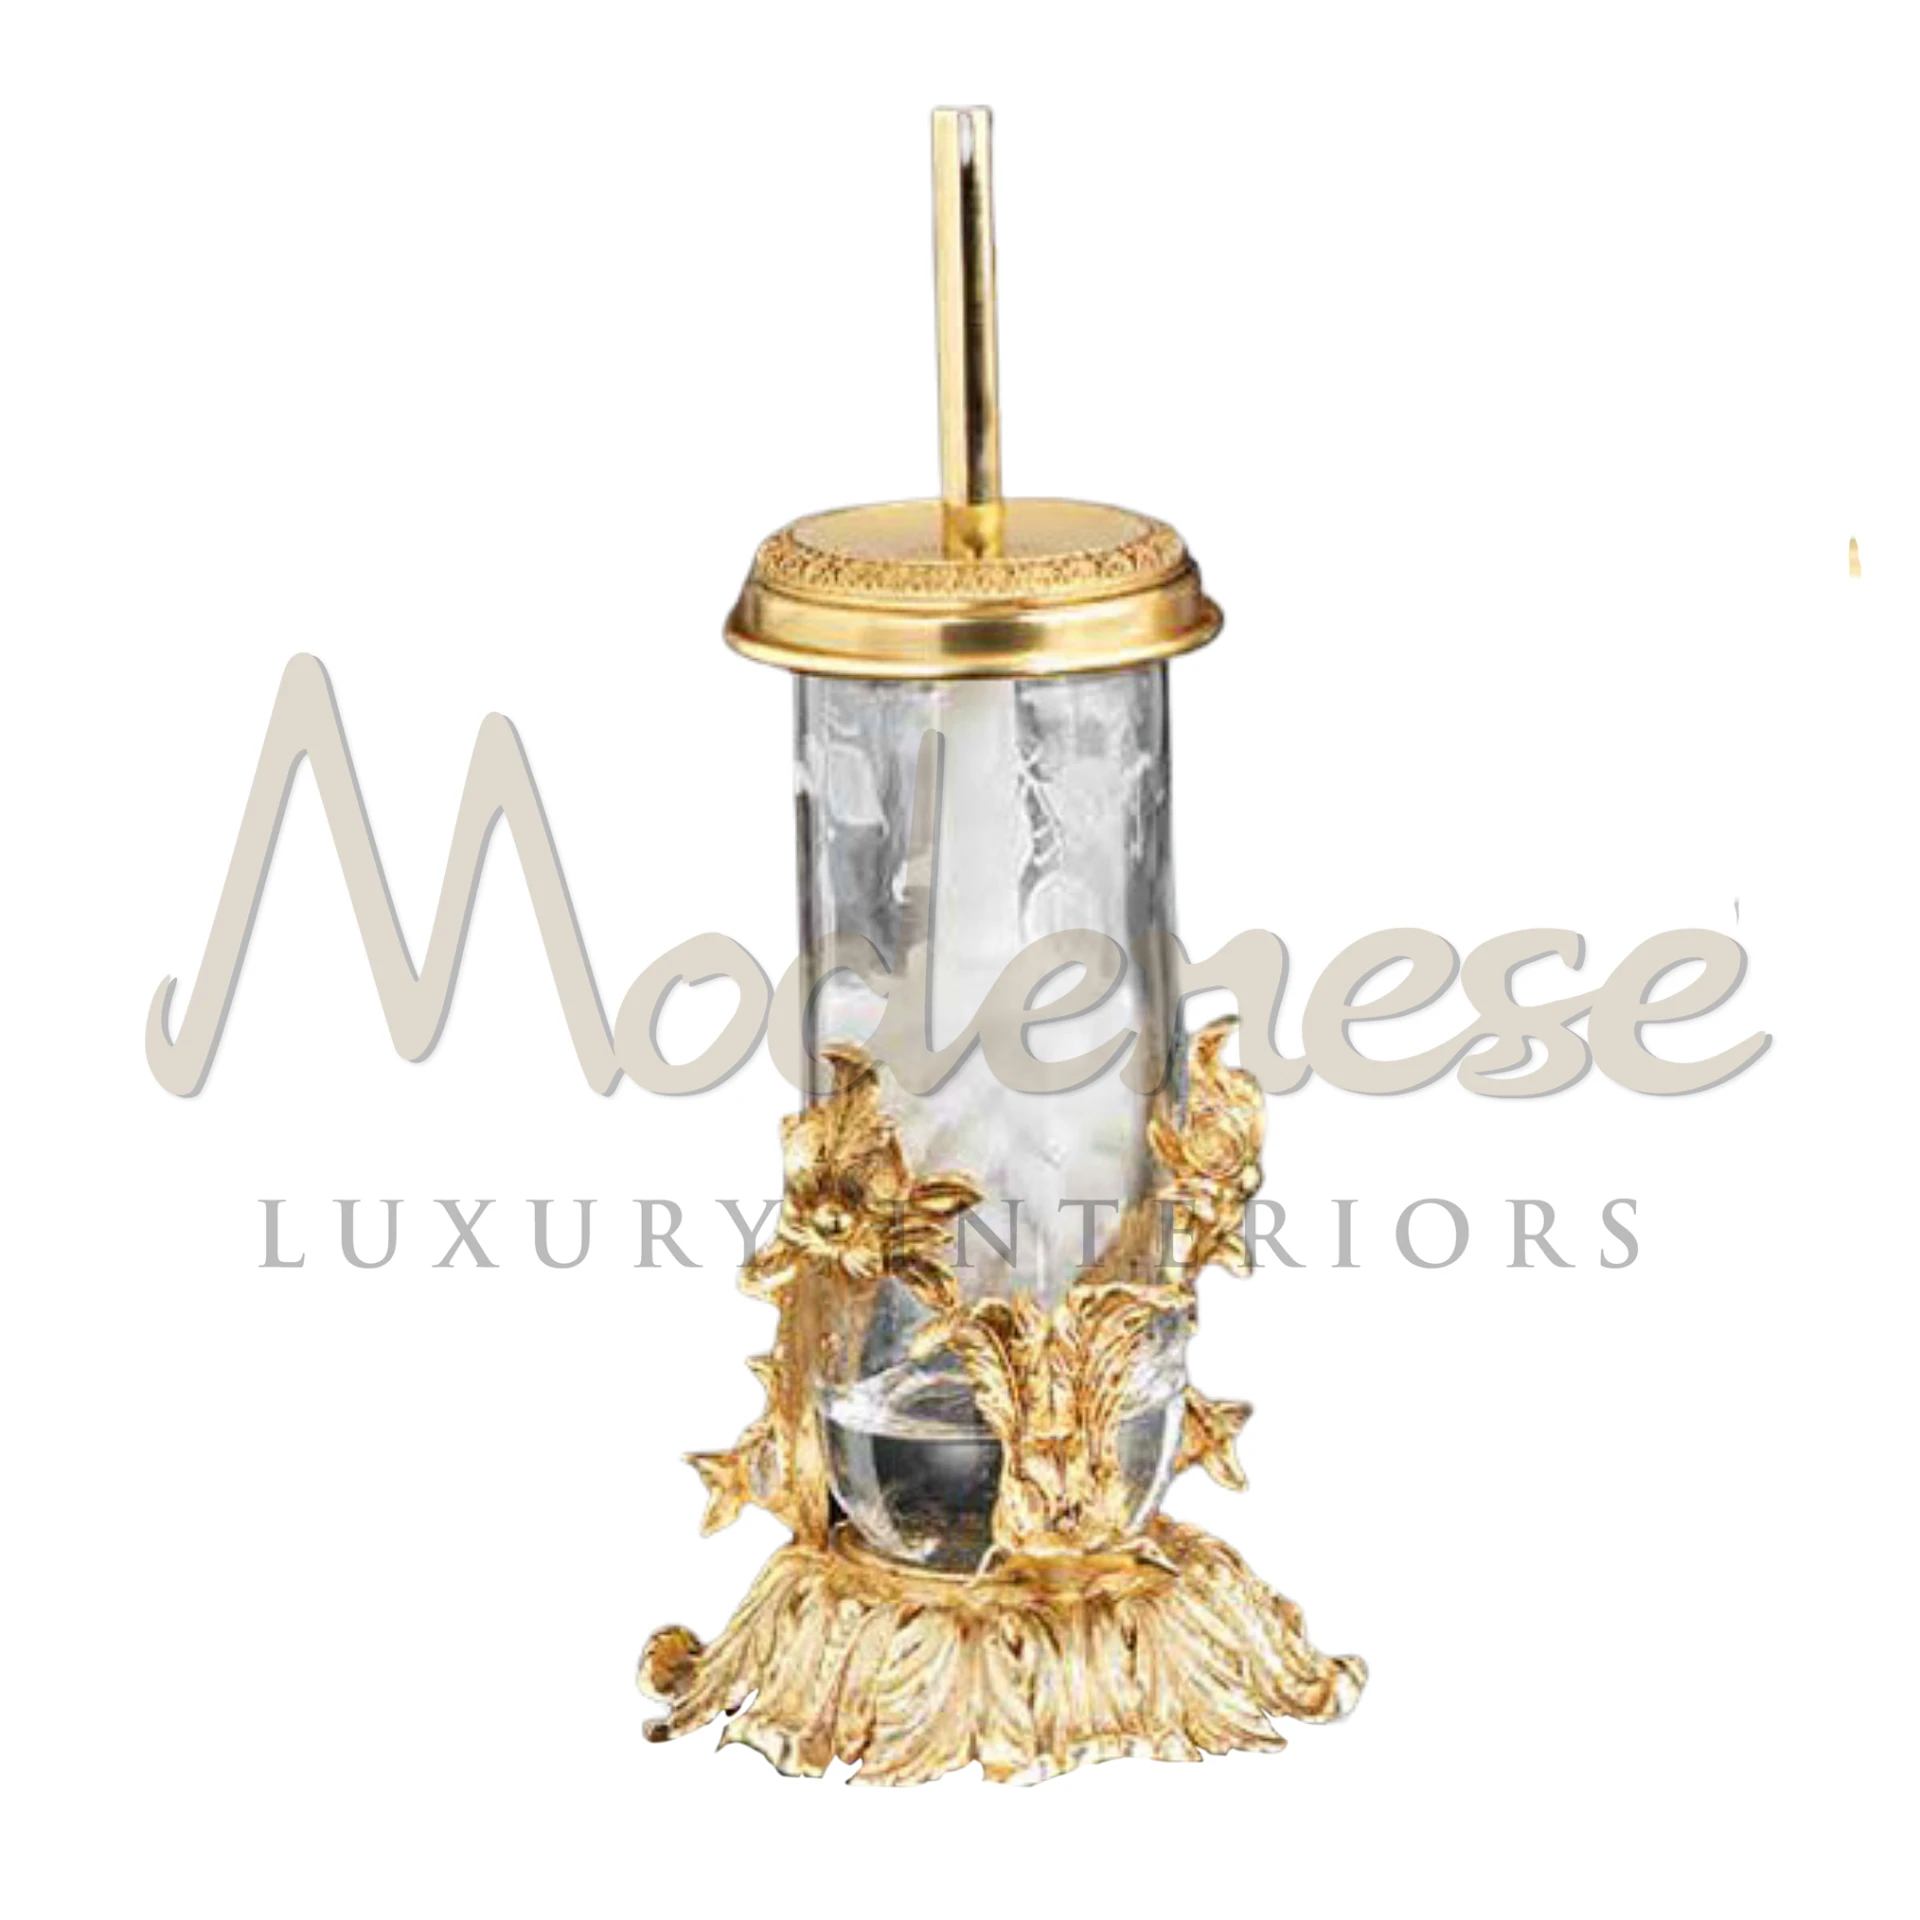 Classical Soap Dispenser in ornate designs, made from porcelain, ceramic, glass, or metal, adding timeless charm to bathroom interiors.